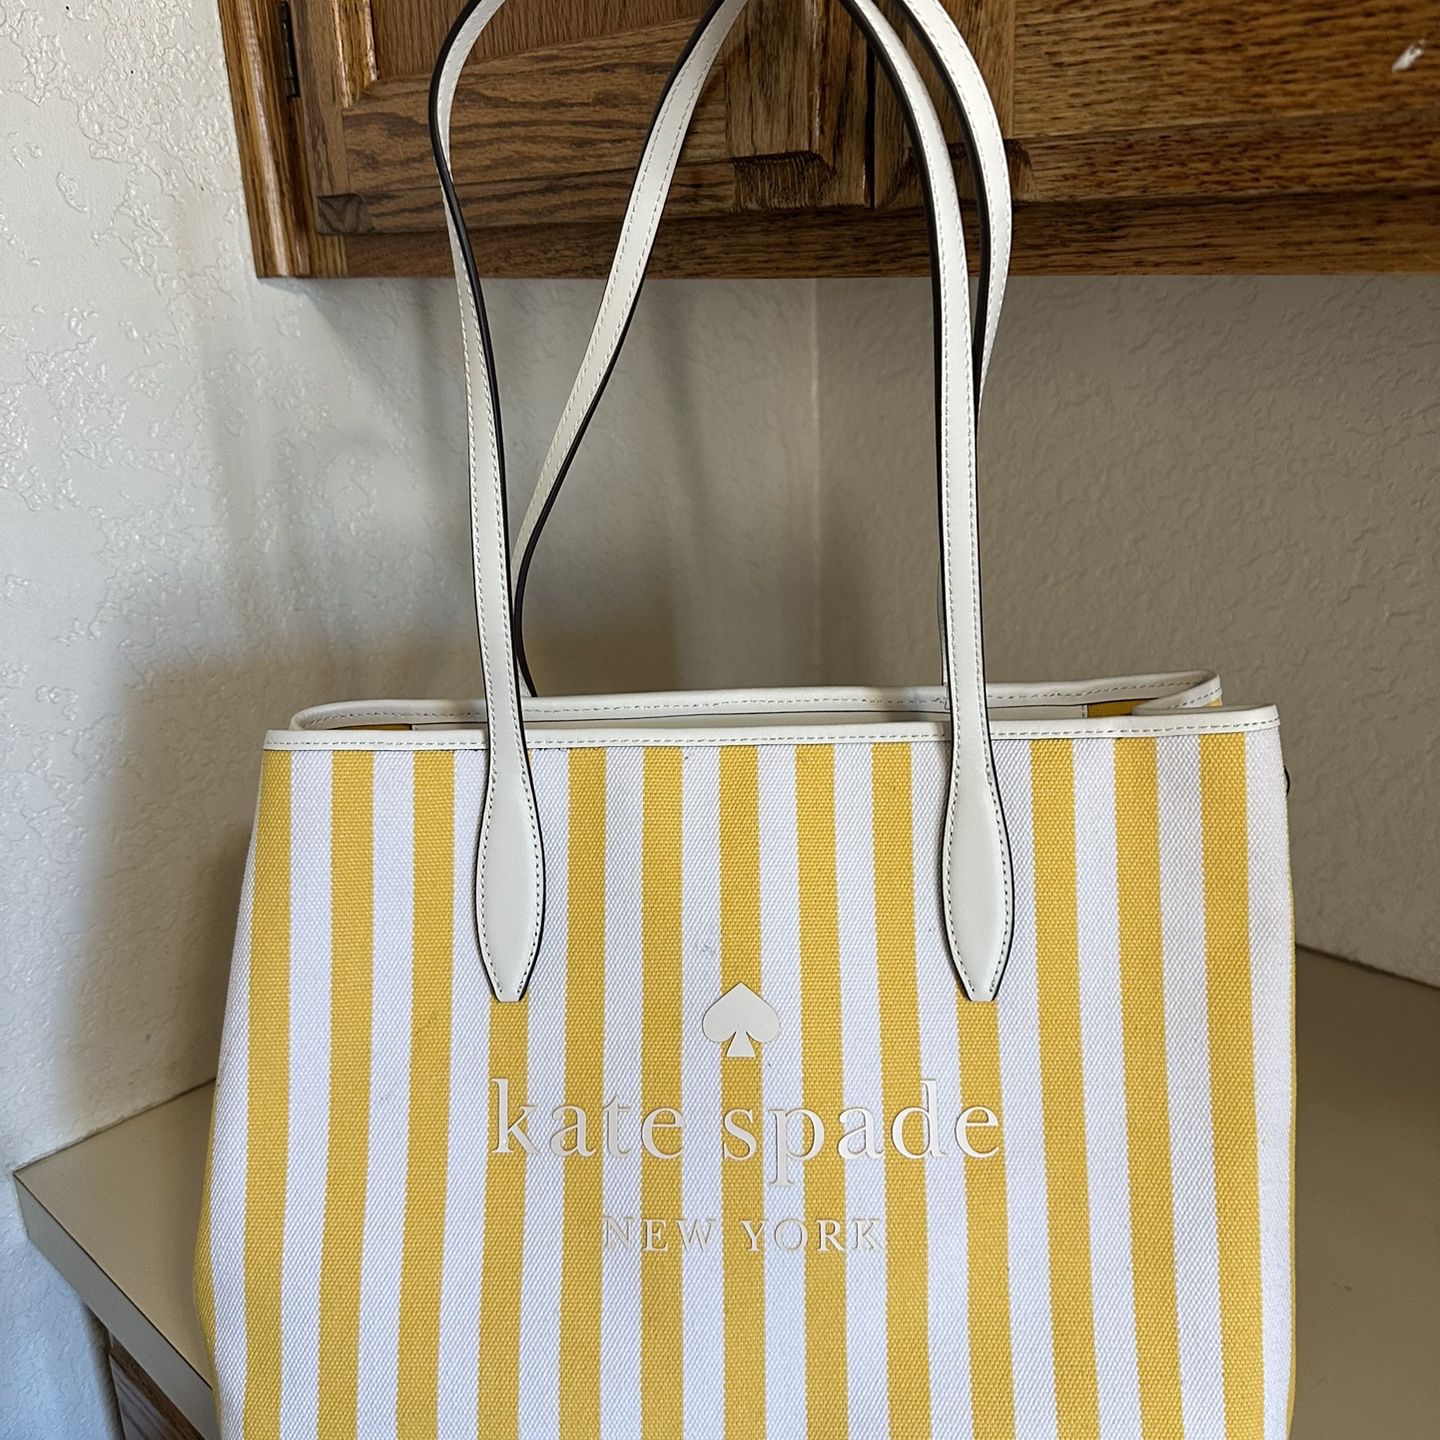 Kate Spade Sam Icon Intarsia Heart Faux Shearling Small Tote Bag for Sale  in Los Angeles, CA - OfferUp